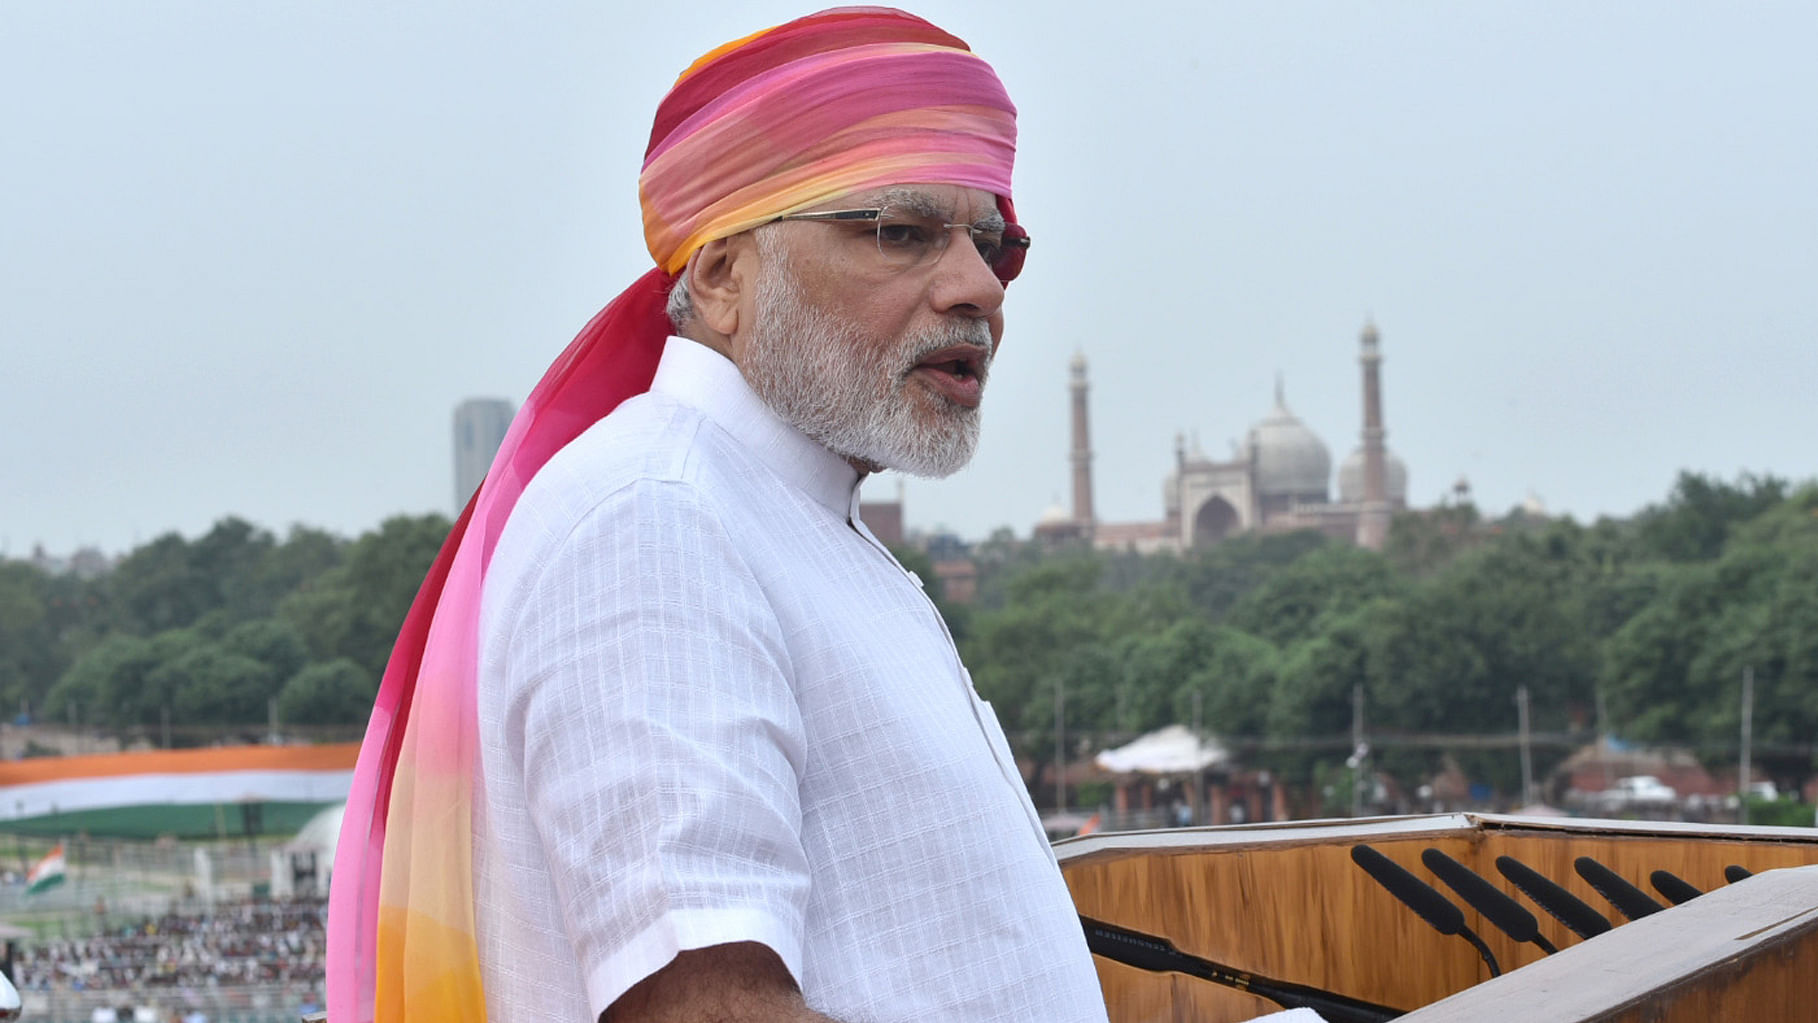 Prime Minister Modi during during his Independence Day address at the Red Fort on 15 August 2016. (Photo: IANS)